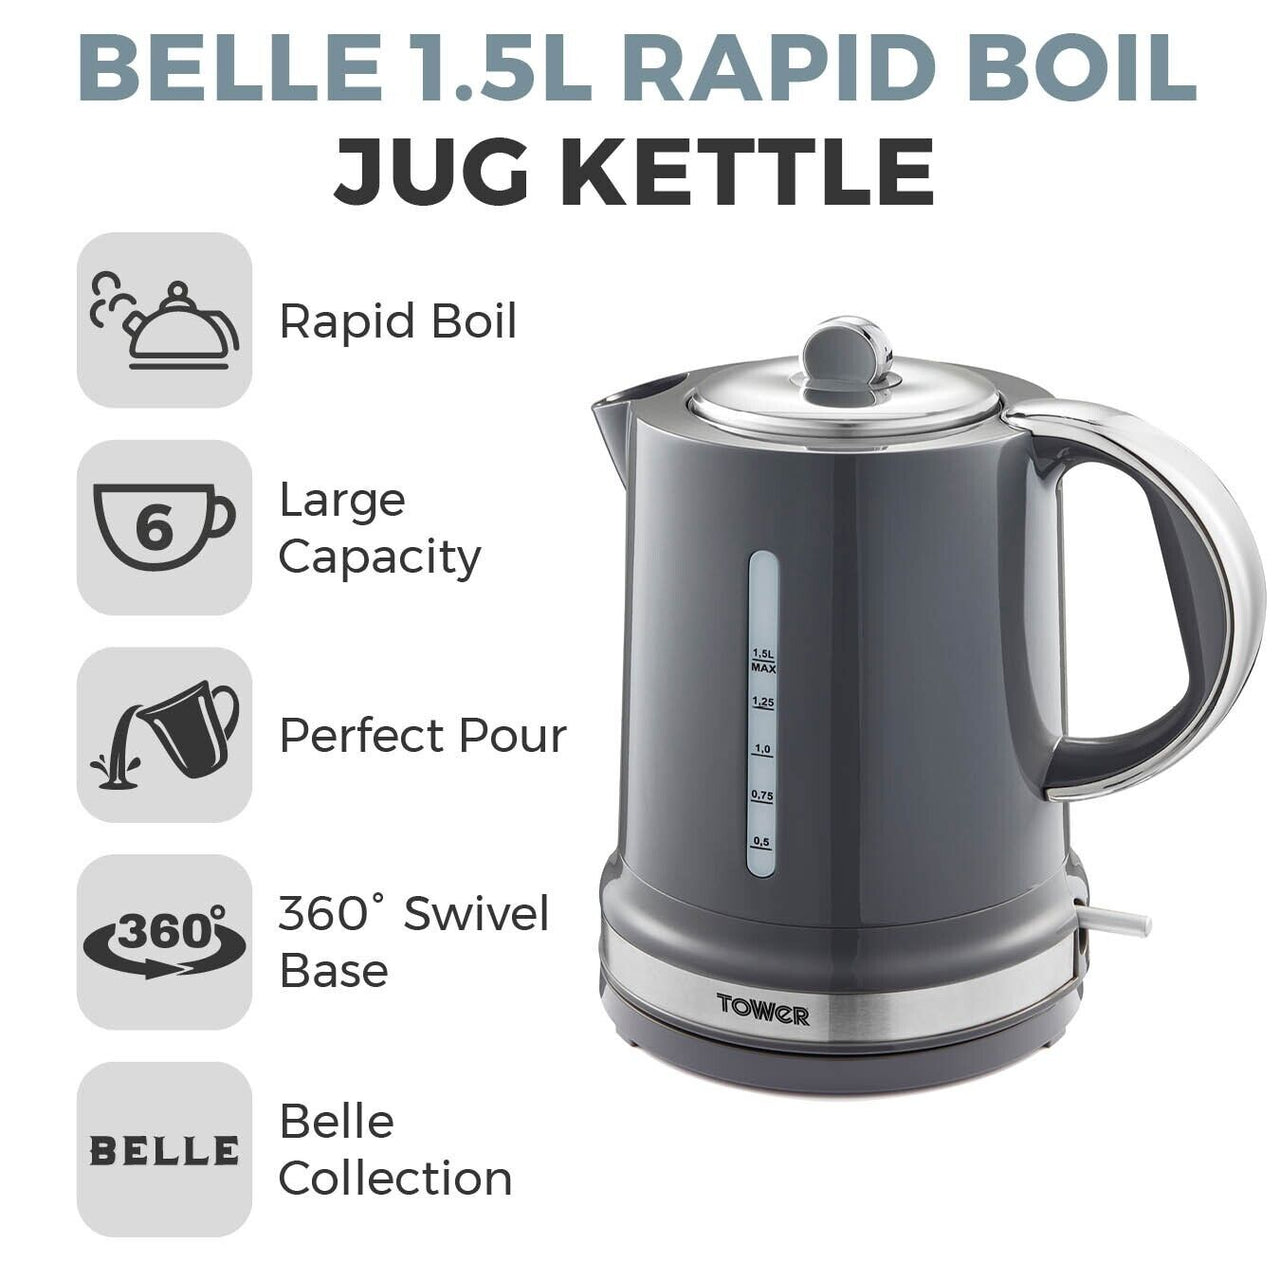 Tower Belle 1.5L 3KW Kettle & 2 Slice Toaster in Graphite Grey